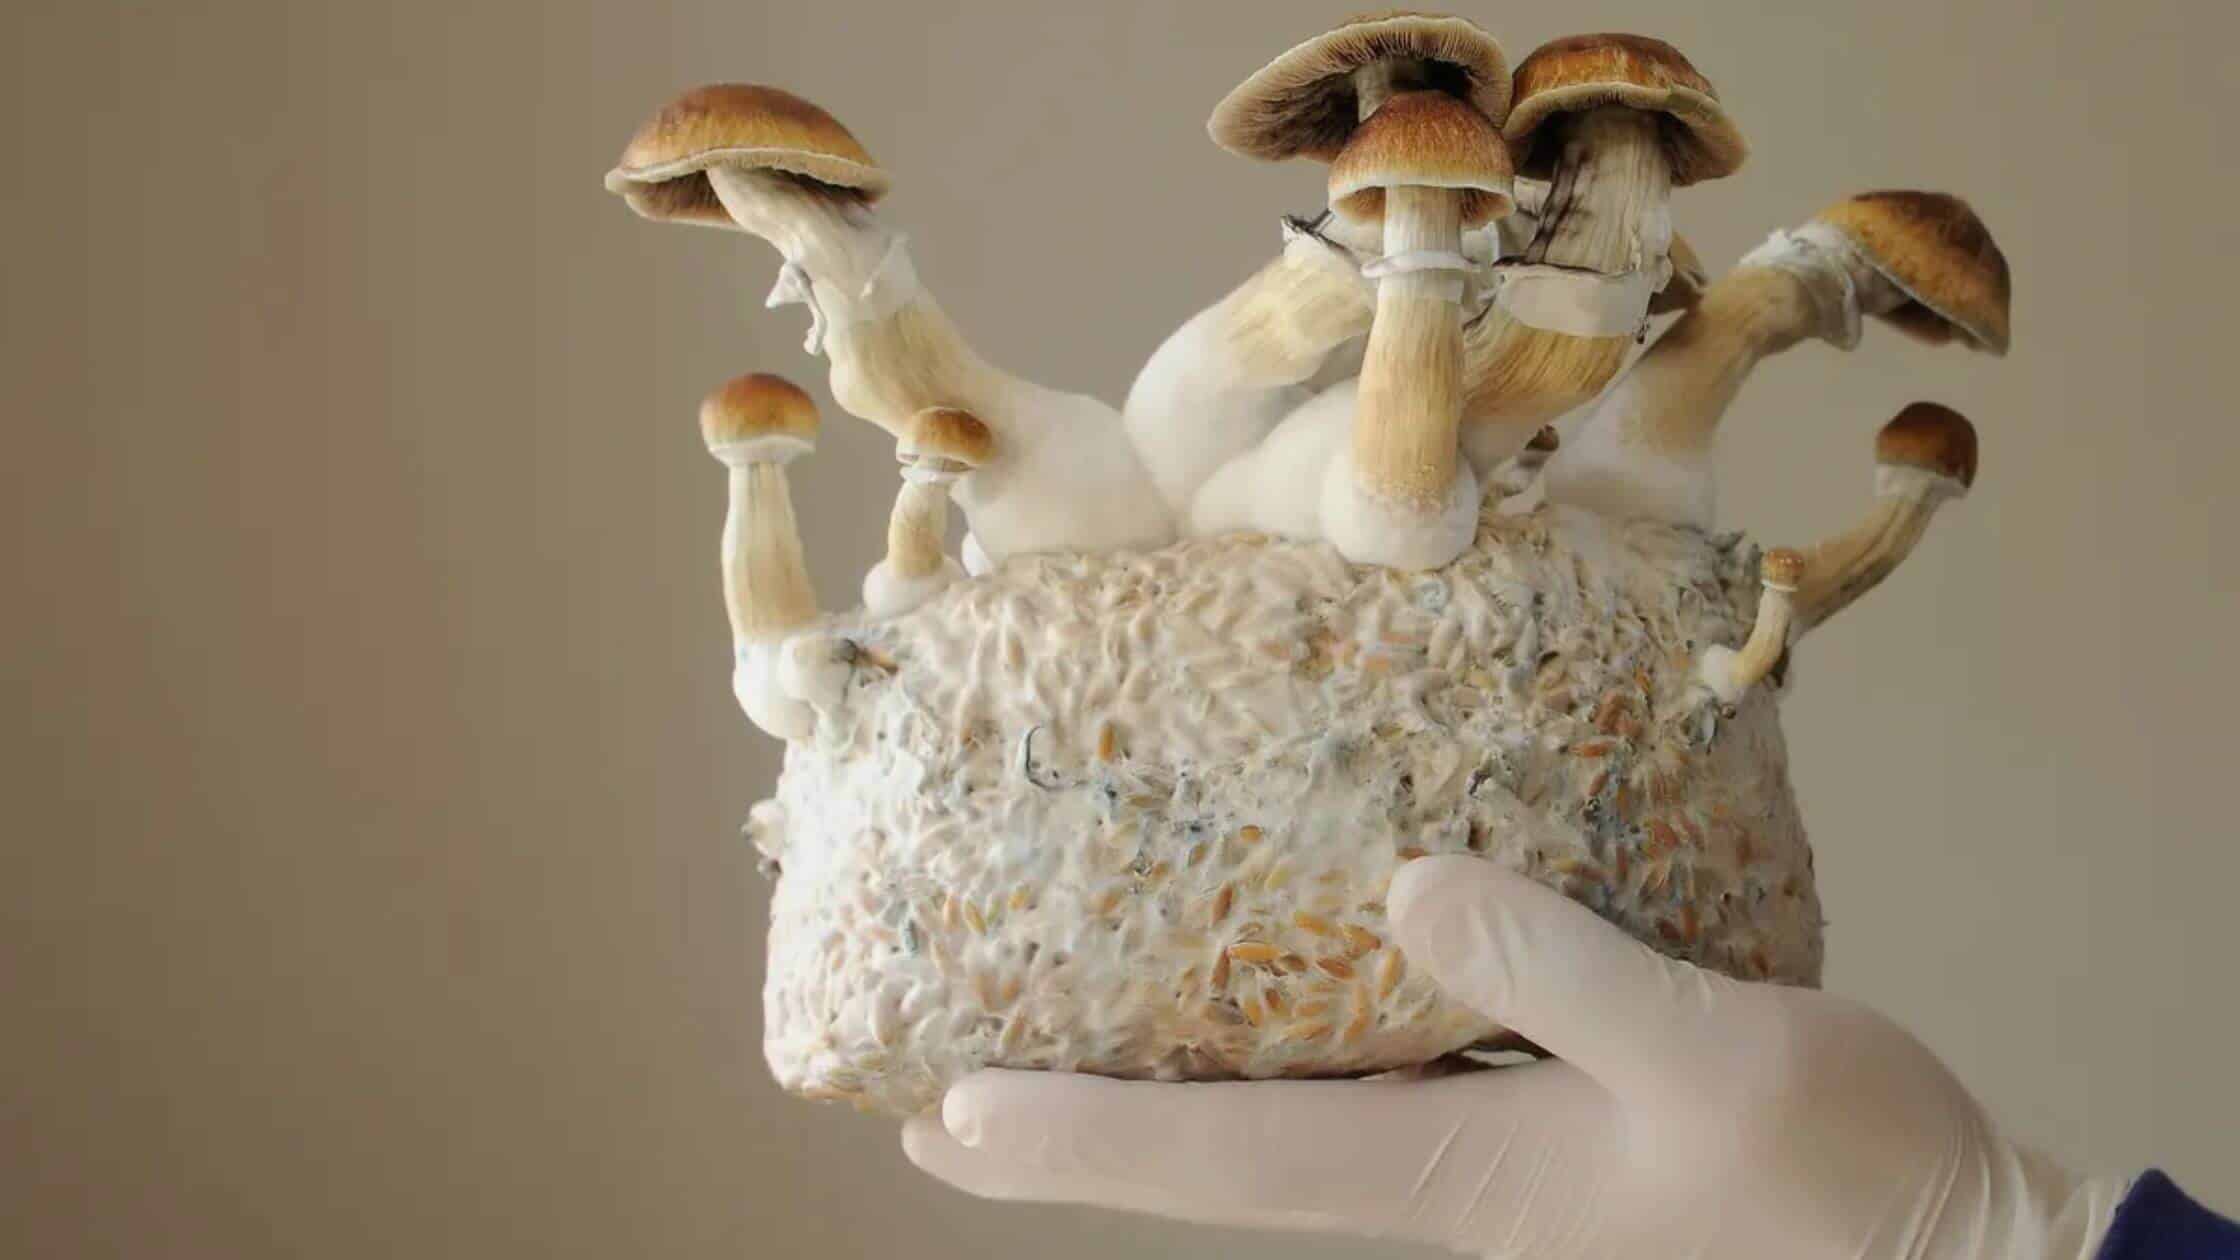 Heavy Drinkers Who Use Magic Mushrooms May Find It Easier To Stopl